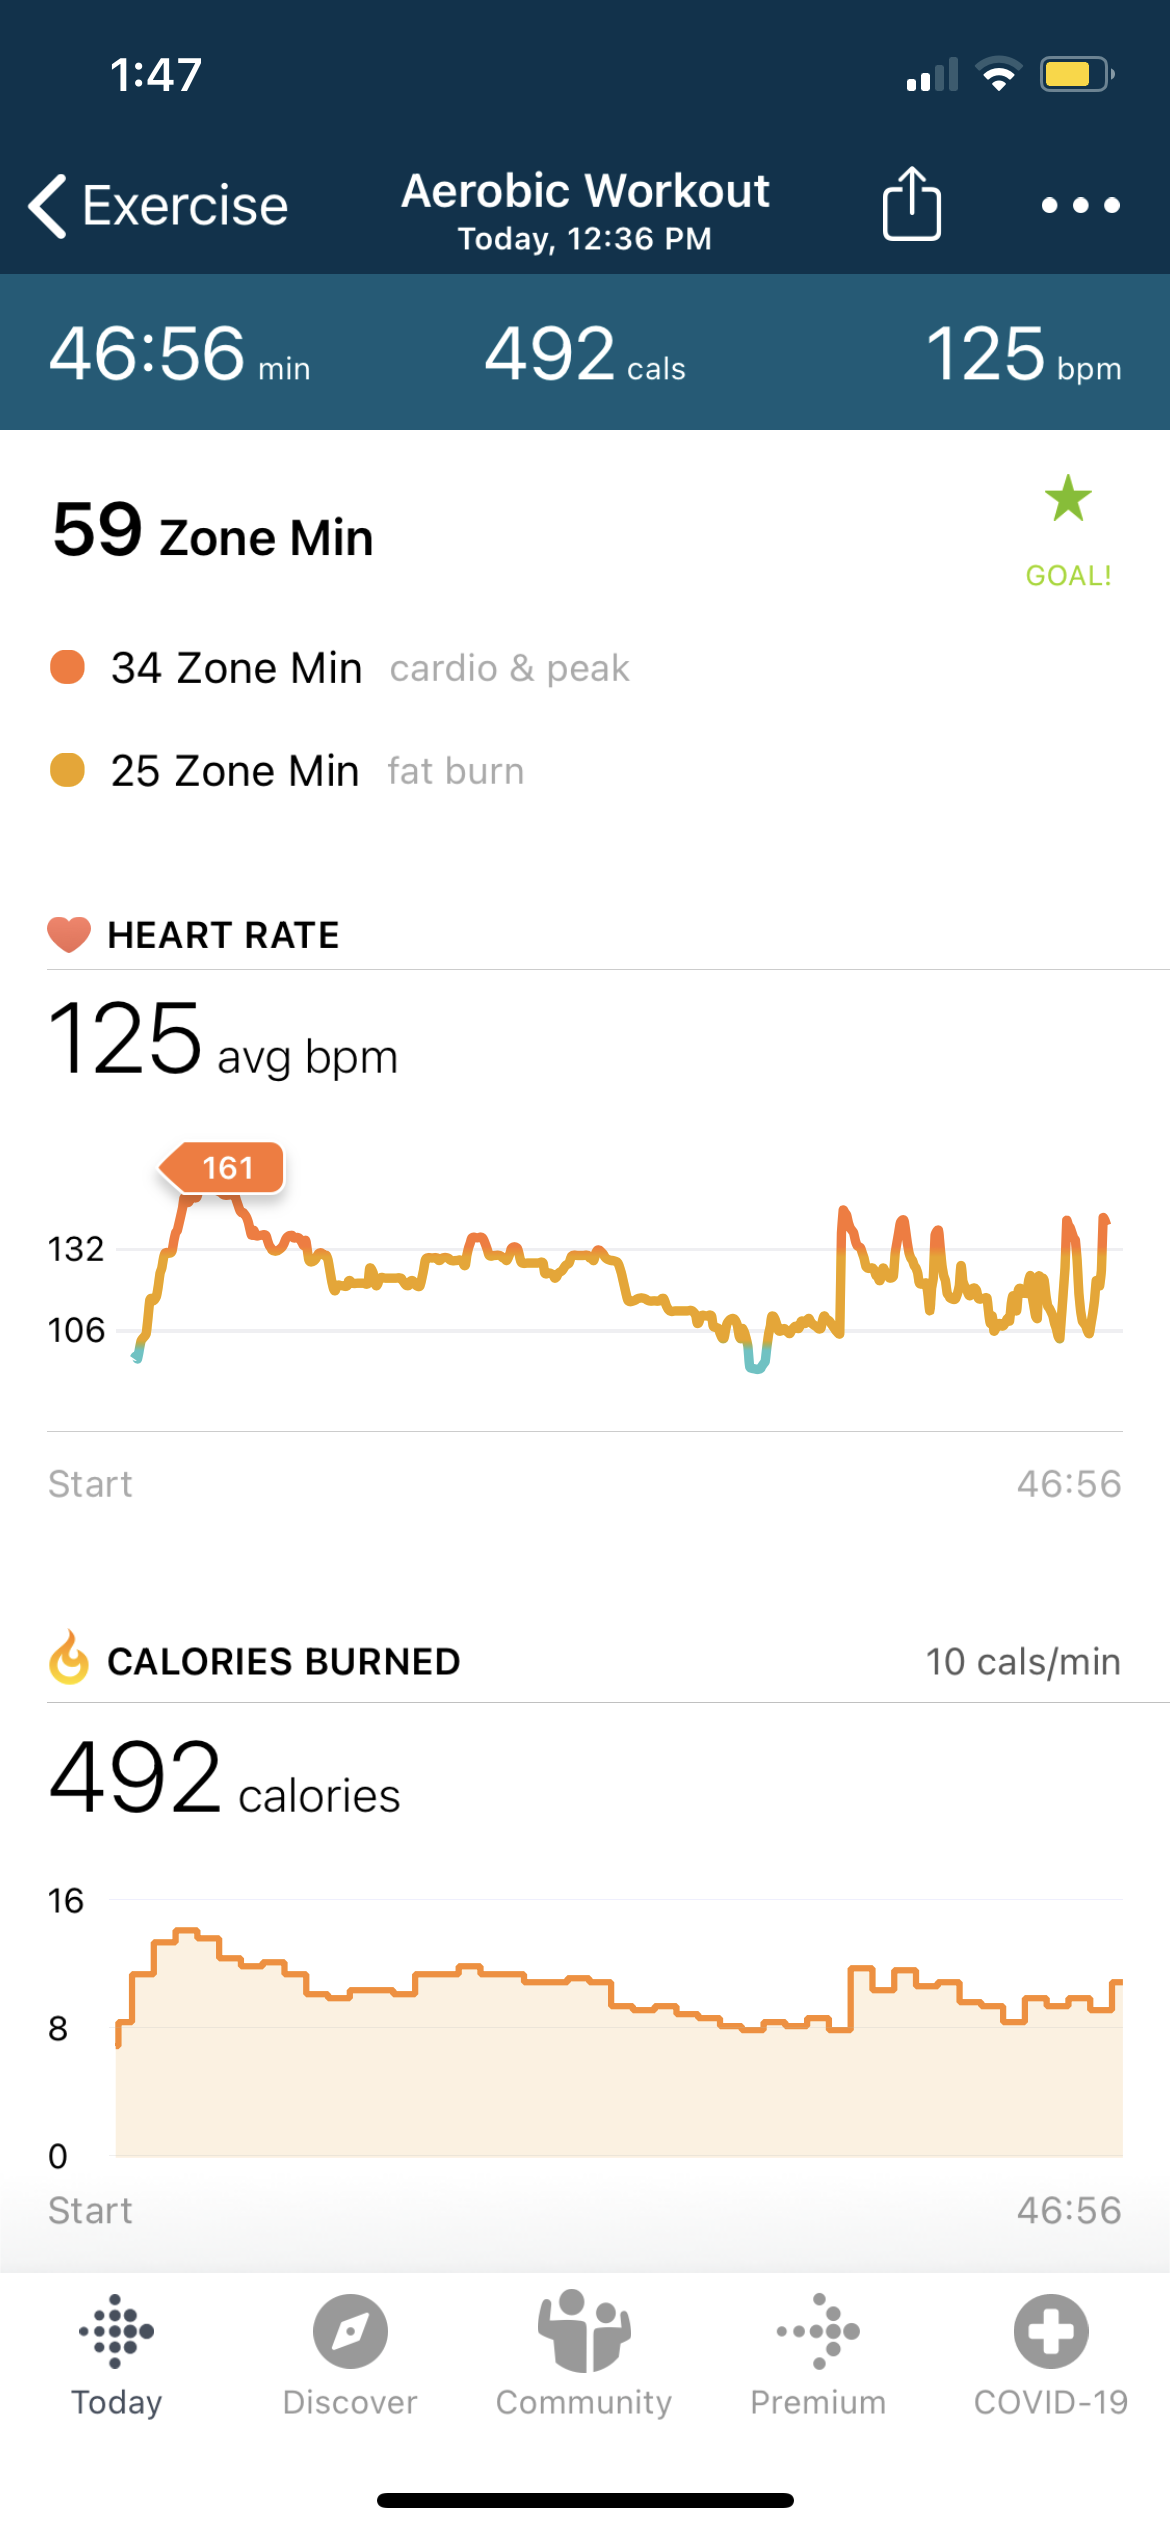 This was my fitbit reading after playing the following tracks in FitXR; 1) Paranoid, 2) Winner, 3)Thunderstruck, 4) Metal137